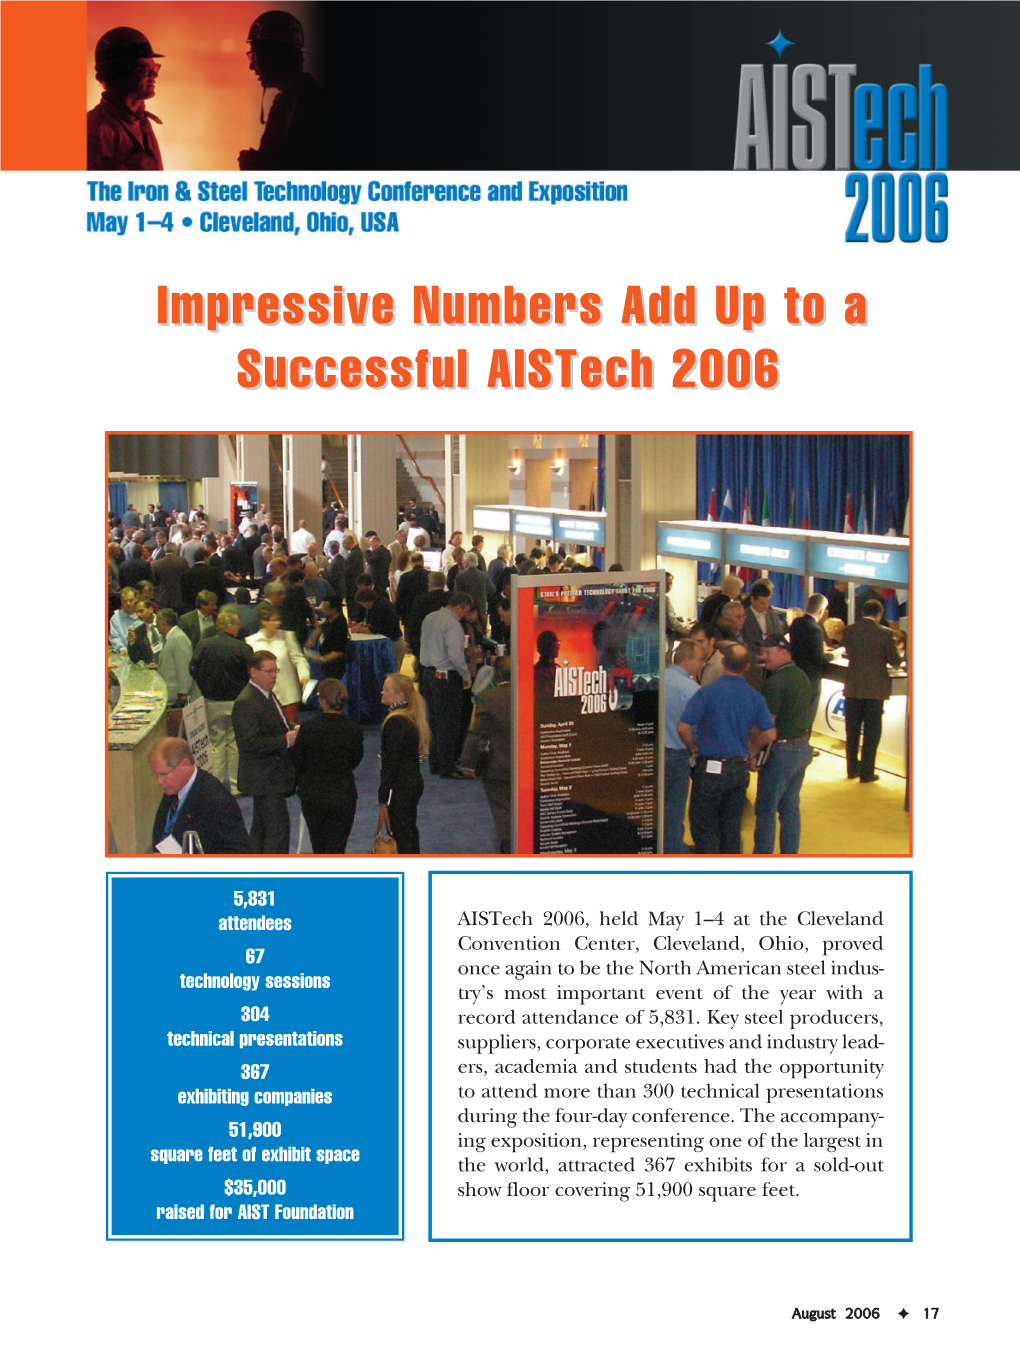 Impressive Numbers Add up to a Successful Aistech 2006